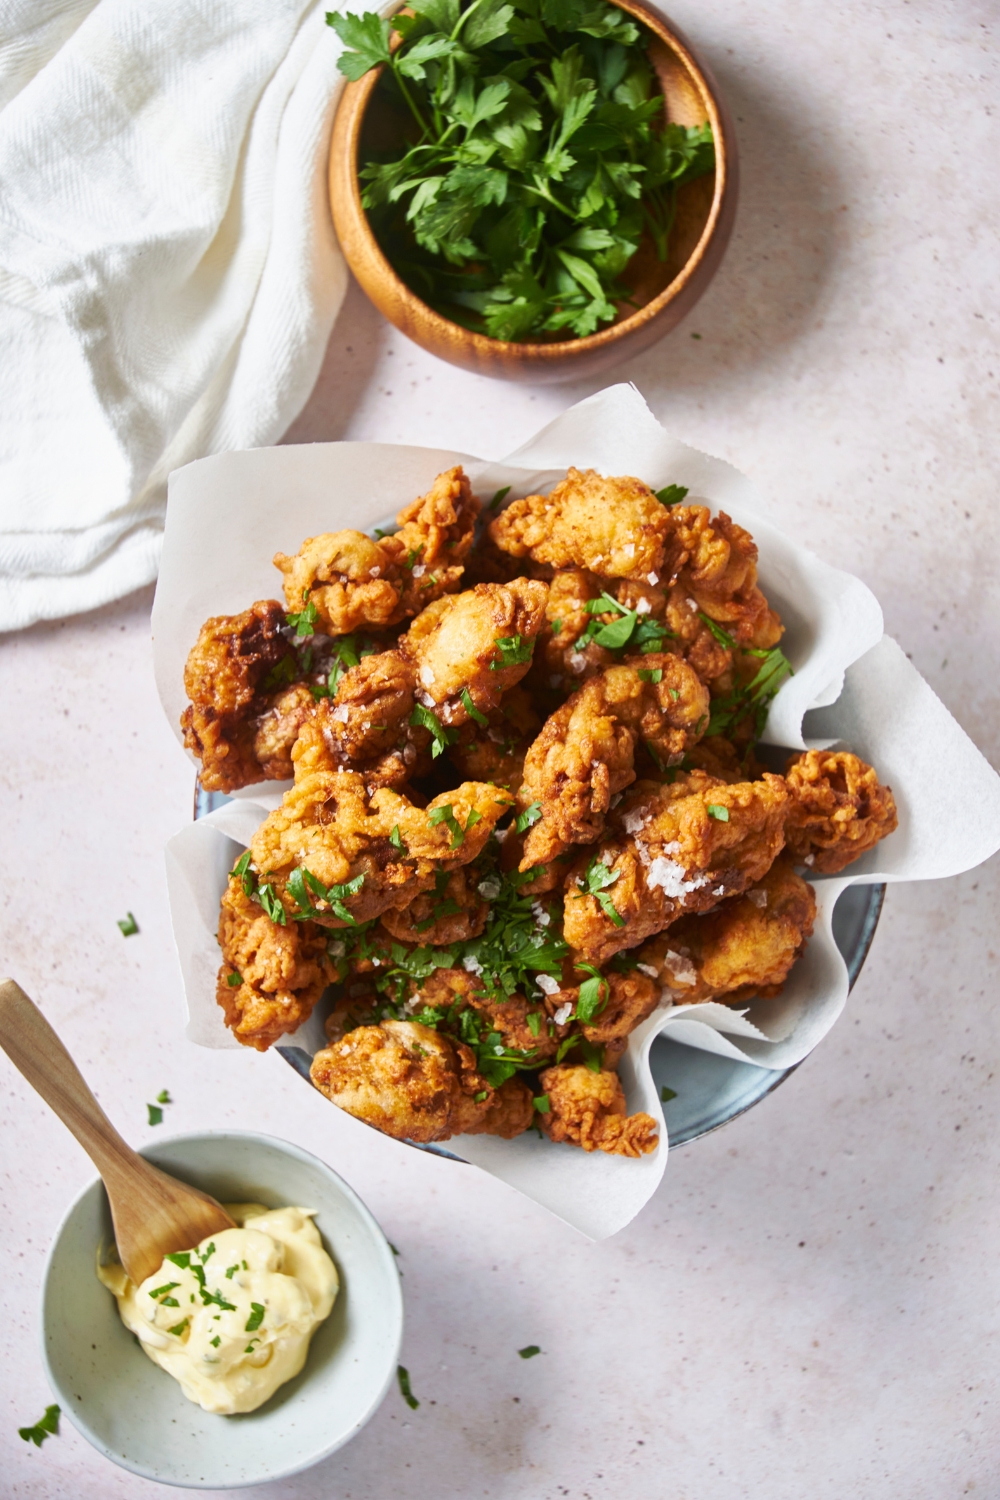 A bowl lined with parchment paper and filled with fried chicken that has been garnished with fresh herbs. Surrounding the bowl there is a white dish towel, a small bowl of fresh herbs, and a bowl with a spoonful of sauce in it.